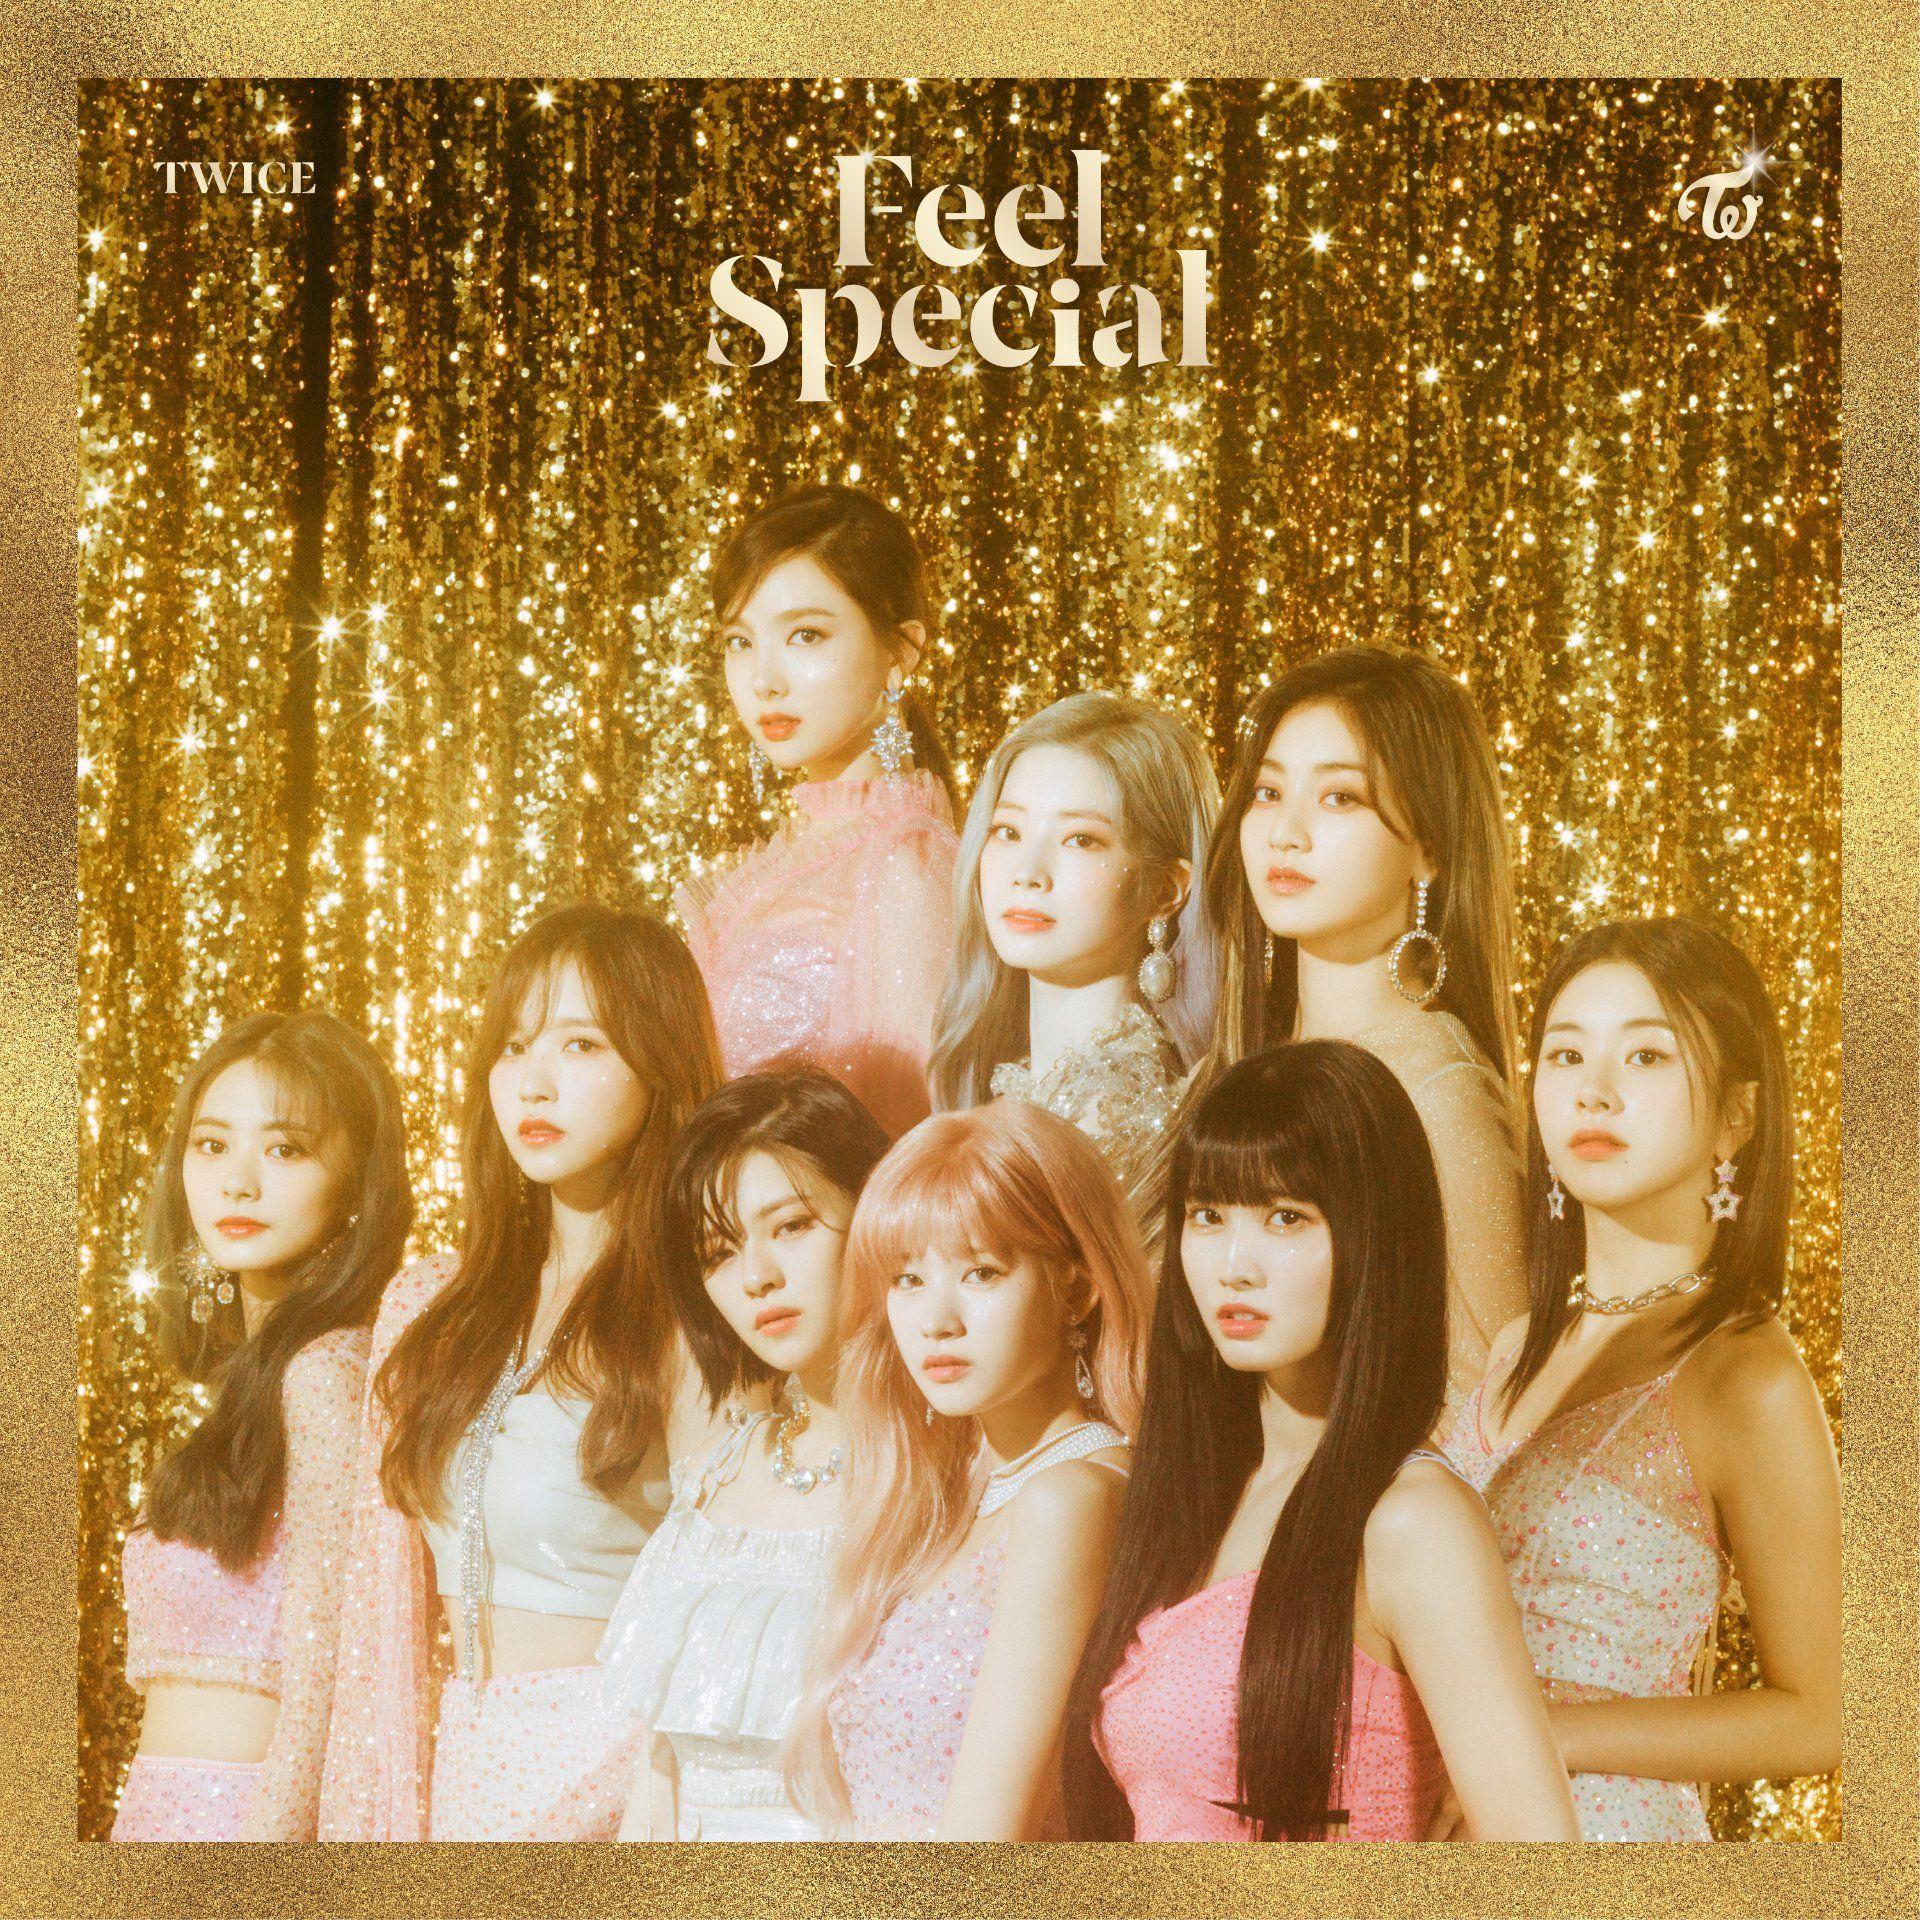 Twice Feel Special Hd Wallpapers Top Free Twice Feel Special Hd Backgrounds Wallpaperaccess 0405